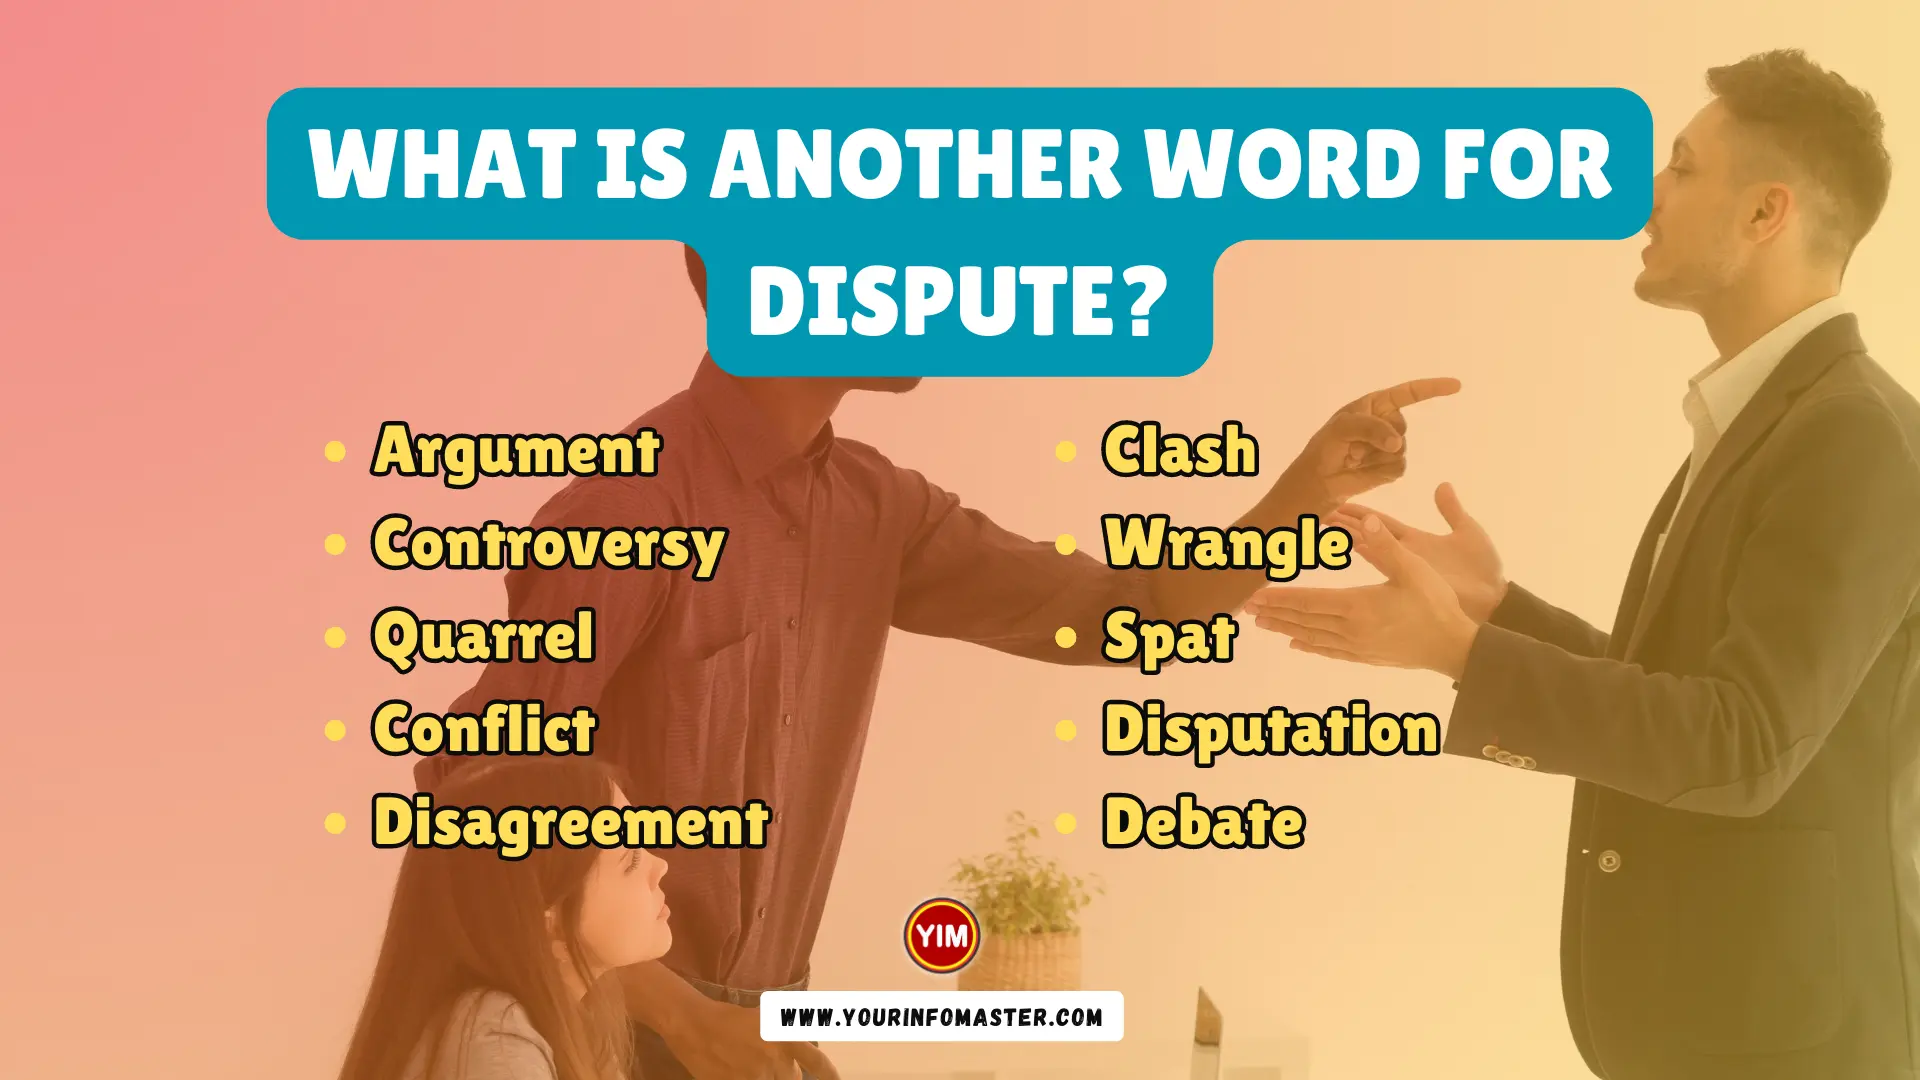 What is another word for Dispute